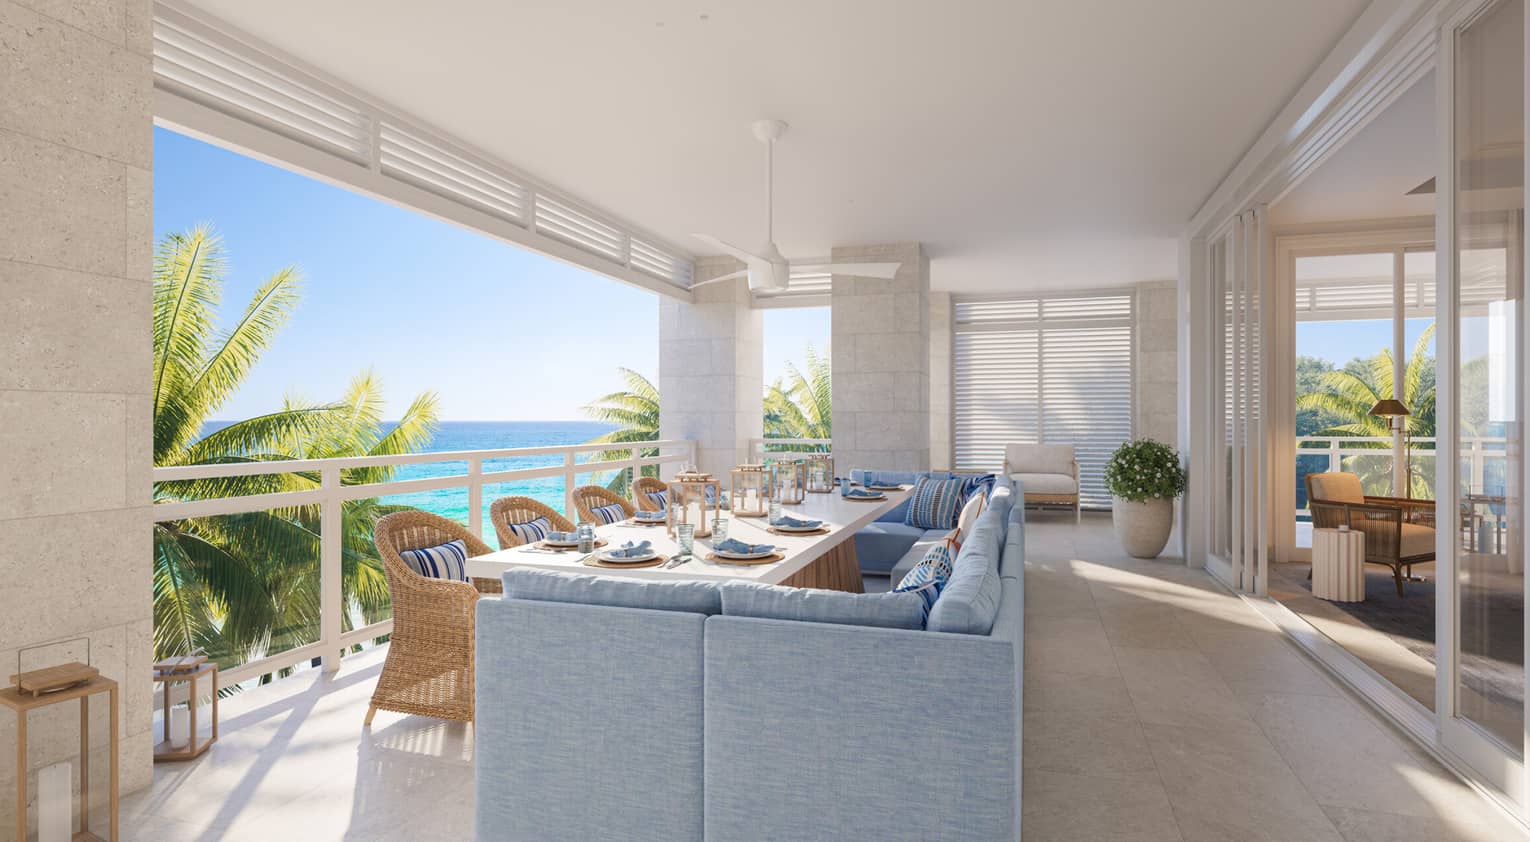 ,Rendering of a modern residence outdoor dining area with an ocean view